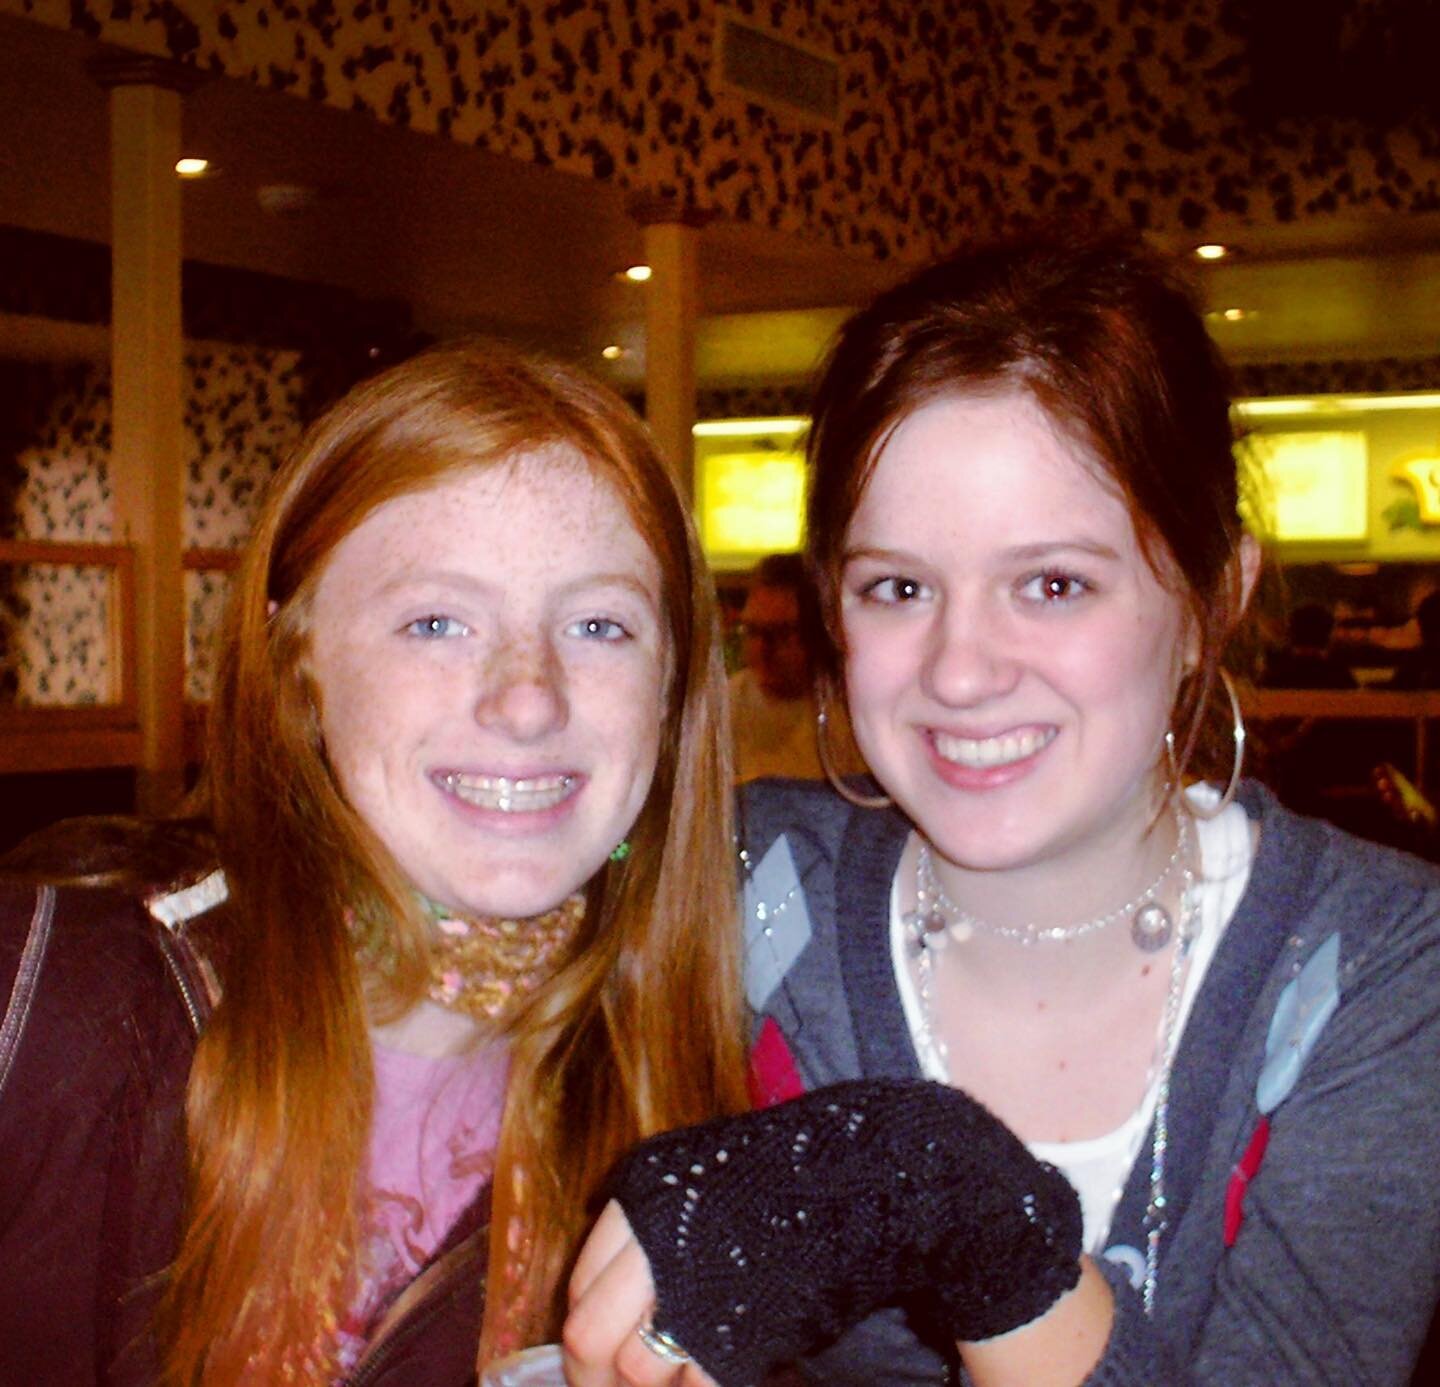 My little sister just left after another brief visit from Australia so obviously I am obligated to post an oldie of us to represent my dramatic sadness regarding her departure. This one hailing from 2005 at a Salt Lake City Crown Burgers.